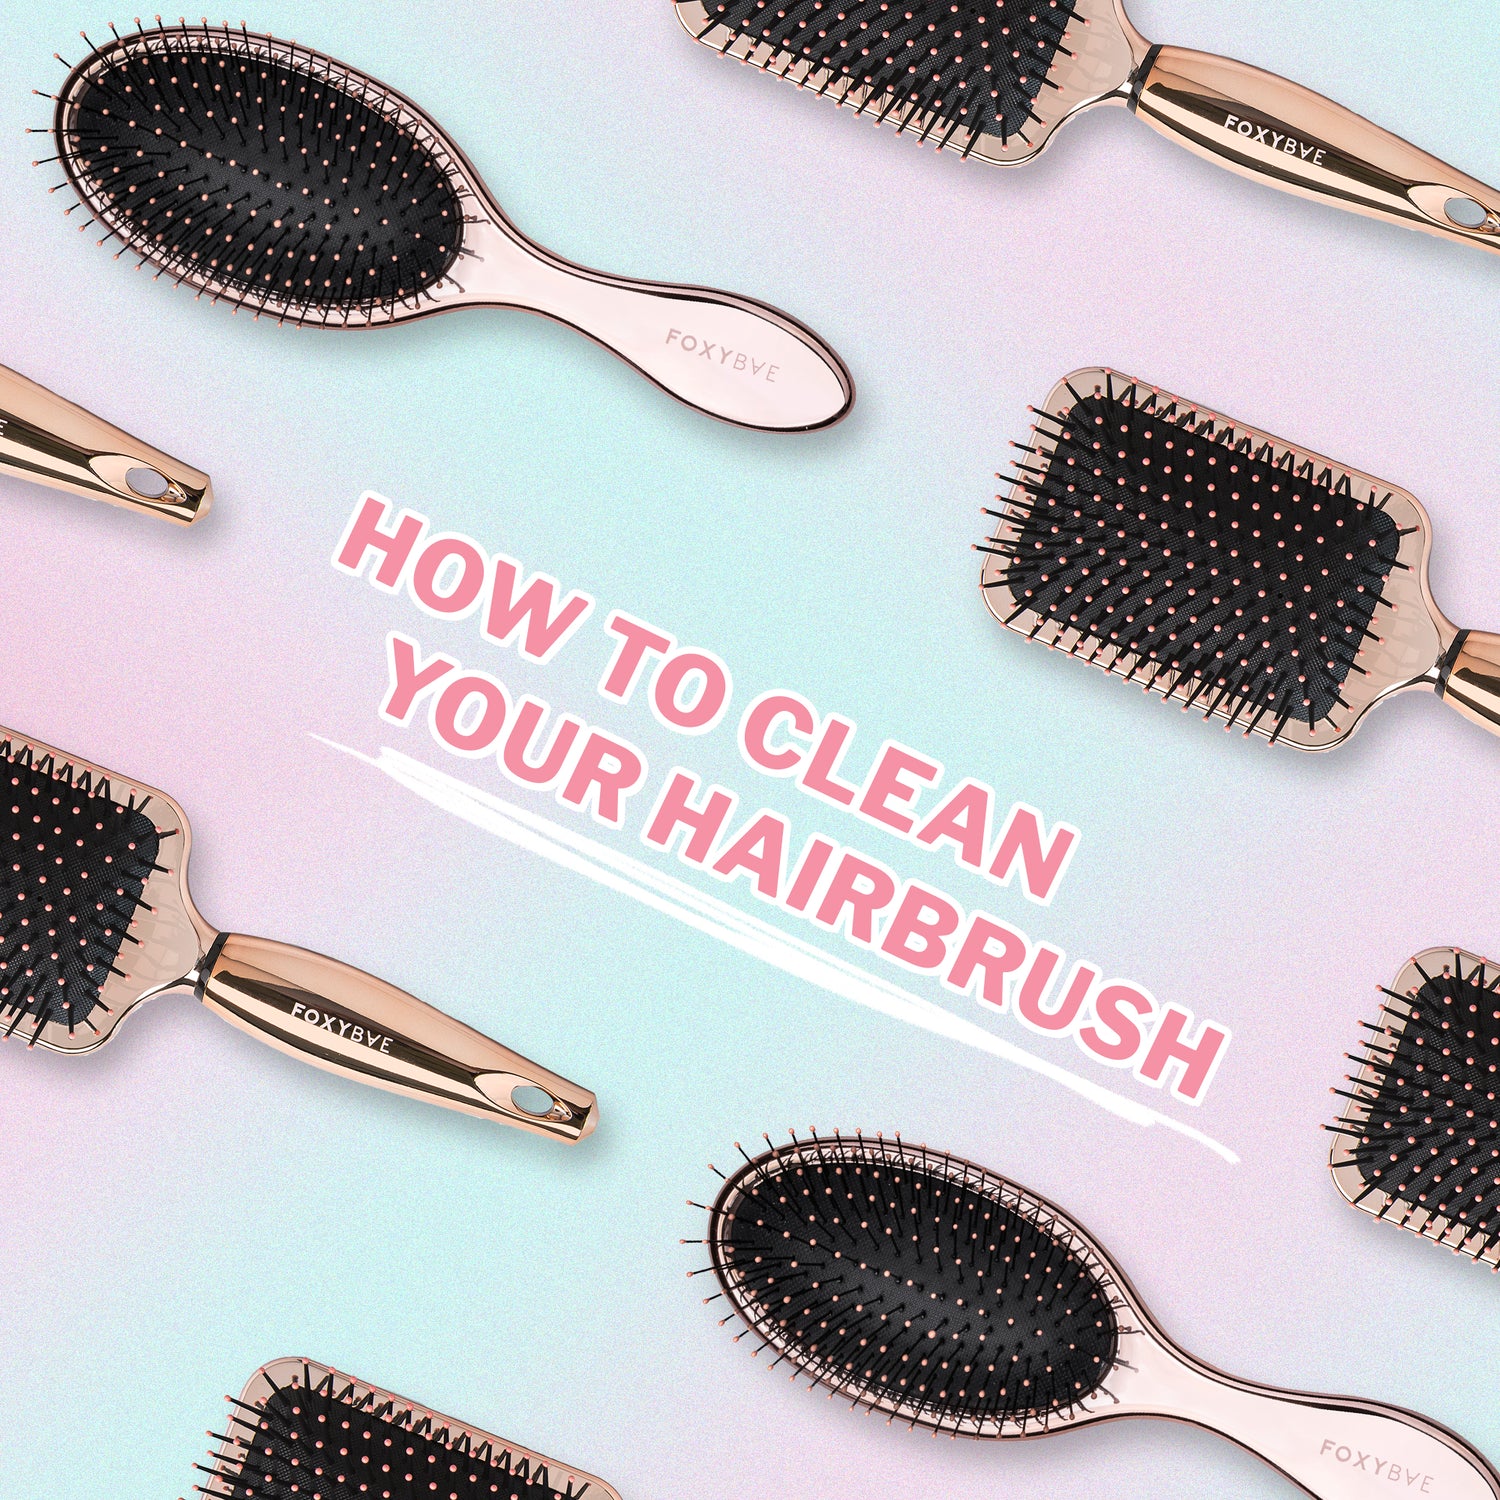 How to Clean Hair Brushes With Vinegar in 2023